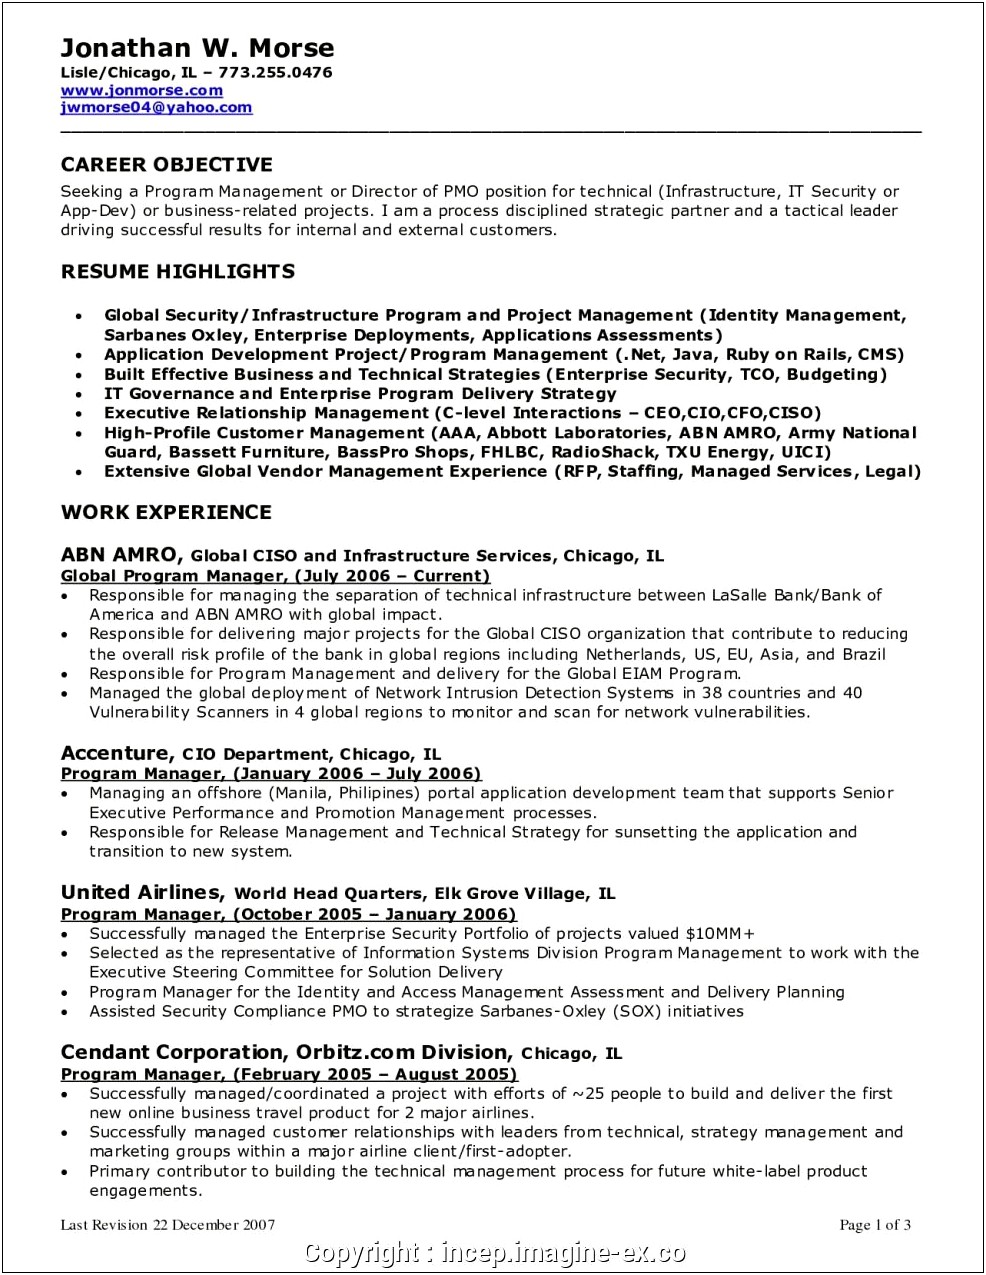 Resume Objective Sample For Manager